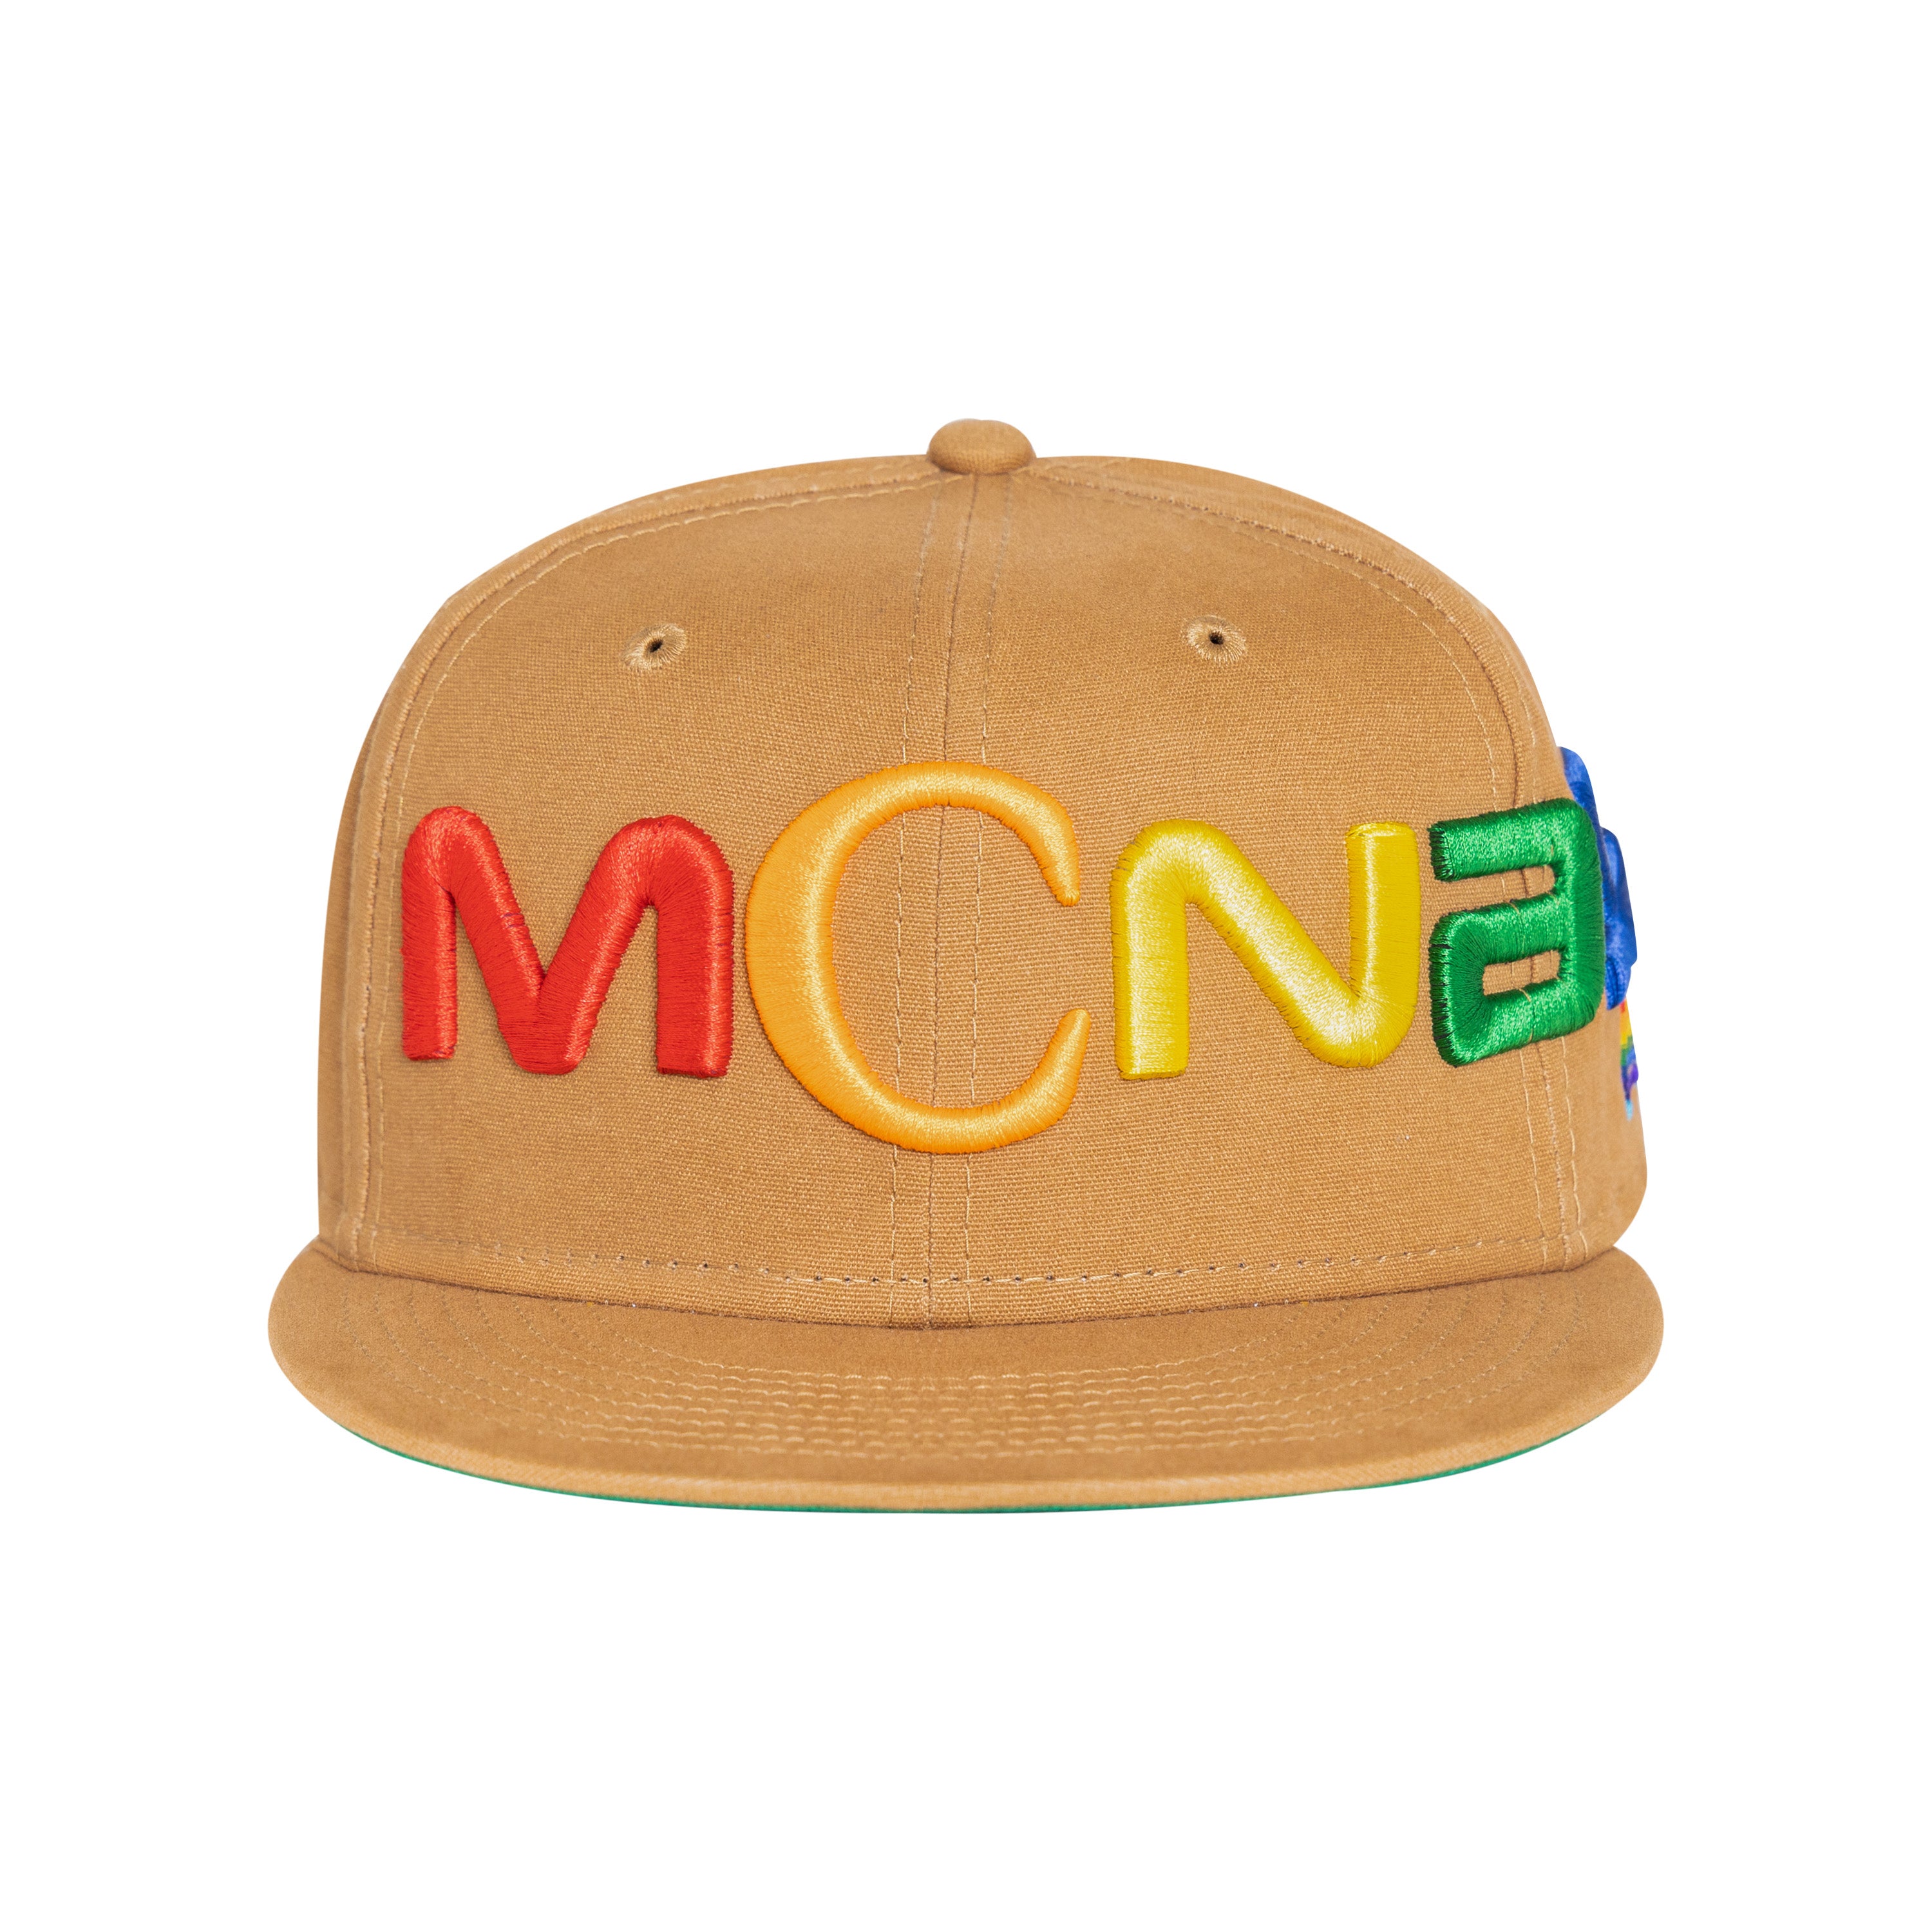 MCNASTY NEW ERA 59/50 FITTED - BROWN